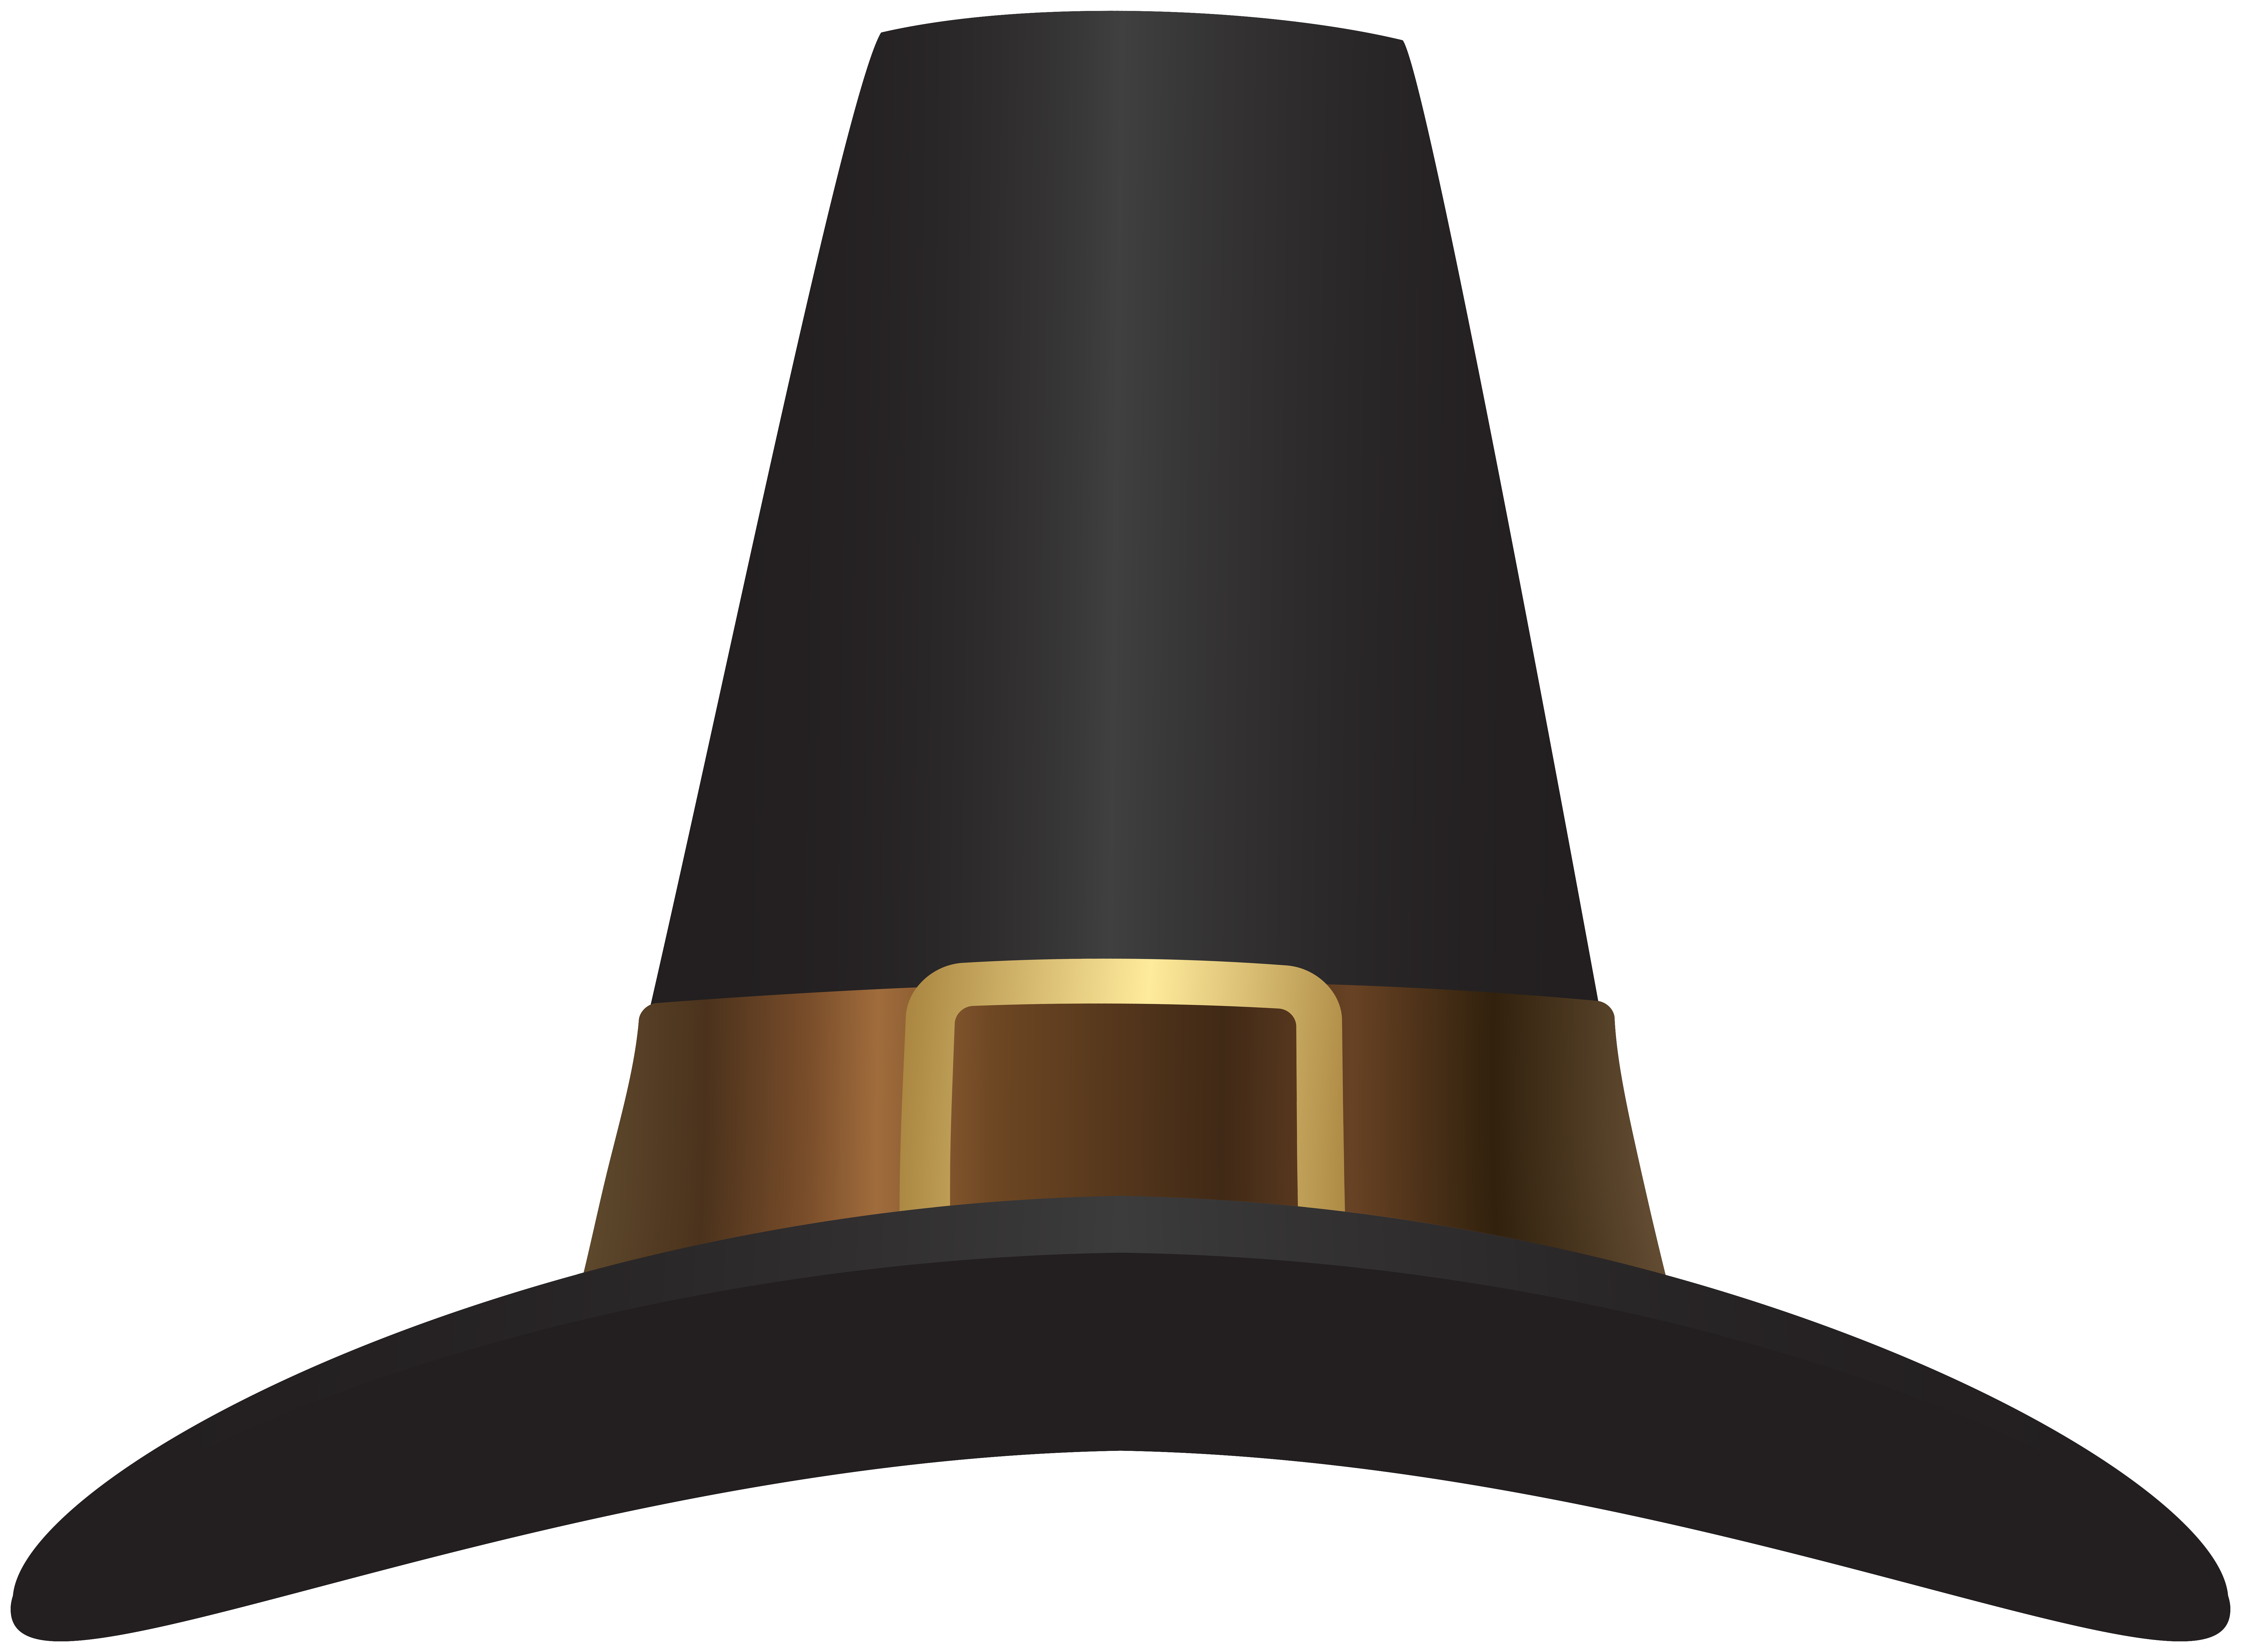 Pilgrim Hat Clip Art PNG Image | Gallery Yopriceville - High-Quality